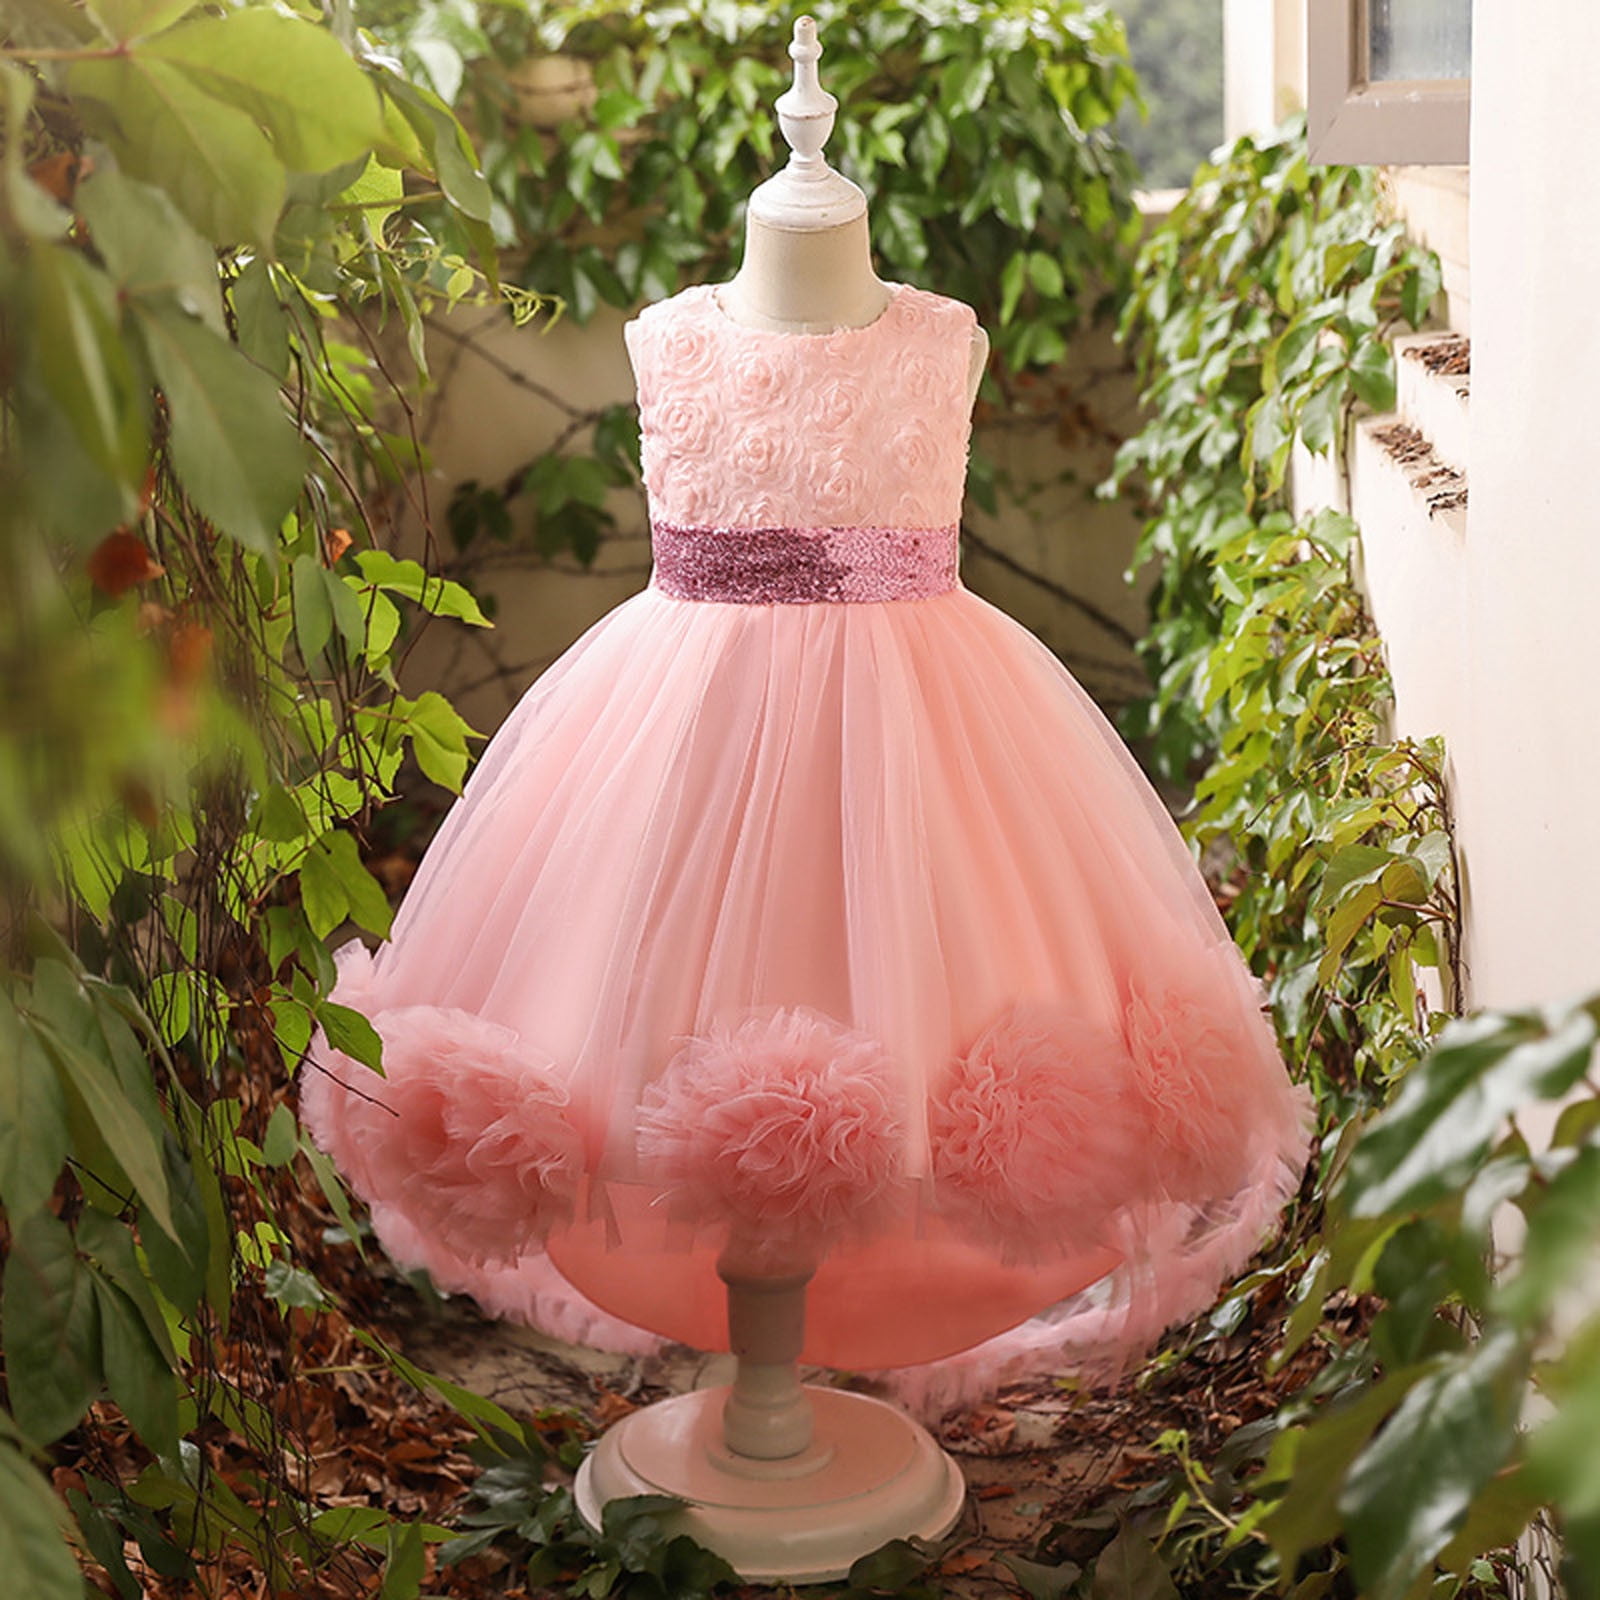 Sweet And Lovely Chiffon Princess Smocked Dress For Girls Perfect For  Summer 3 And Parties Available In Sizes 2 3 Ideal For 7 Year Olds AA230531  From Catherine006, $19.45 | DHgate.Com